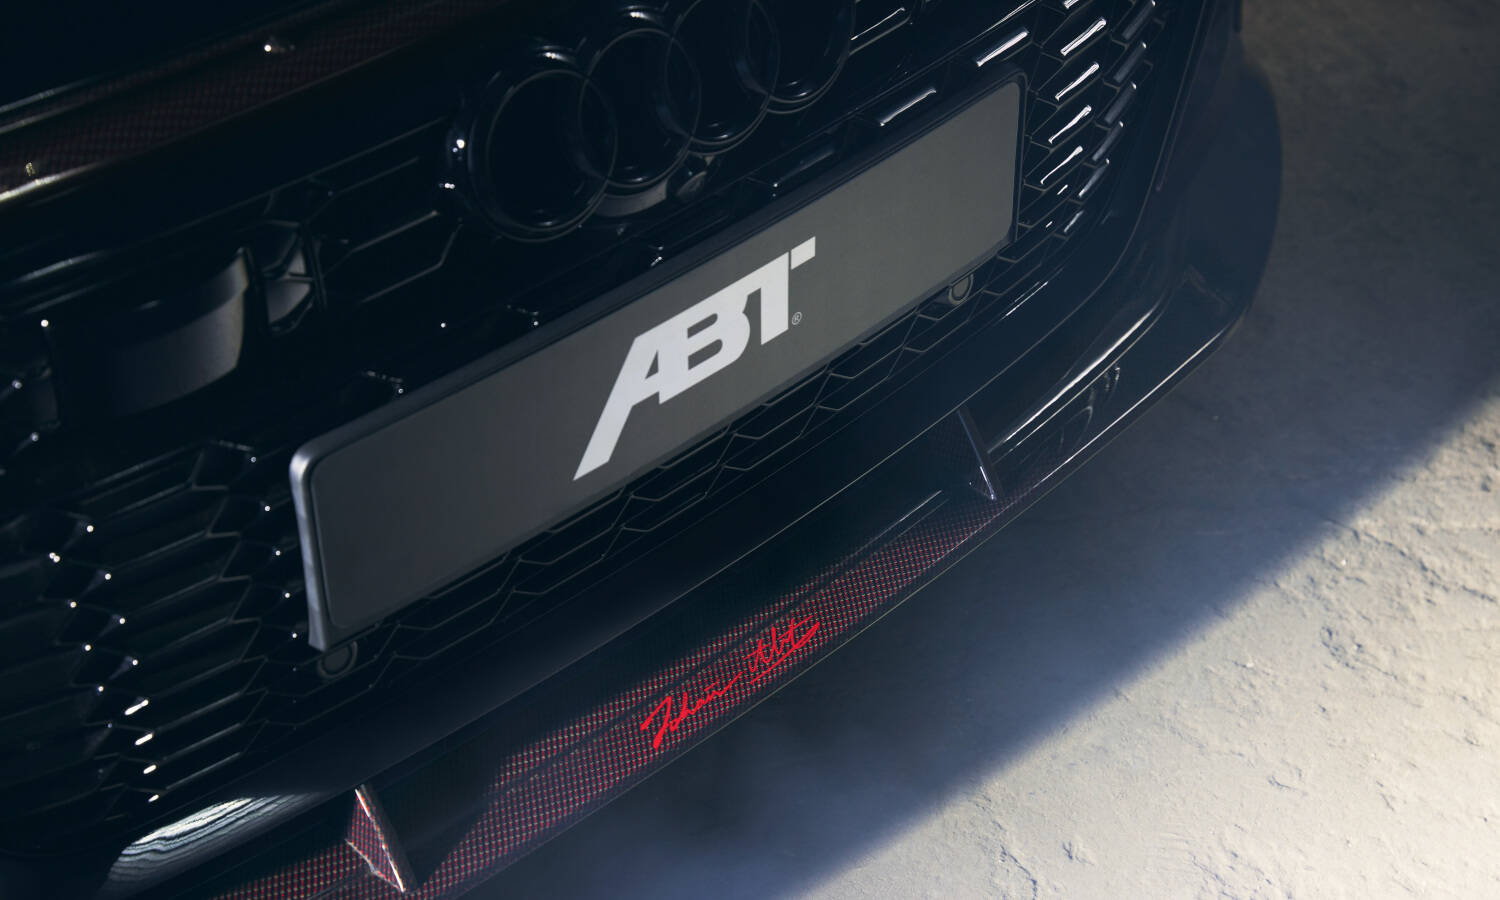 RS 6 transformed into the Johann Abt Signature Edition with 800 HP - Audi  Tuning, VW Tuning, Chiptuning von ABT Sportsline.